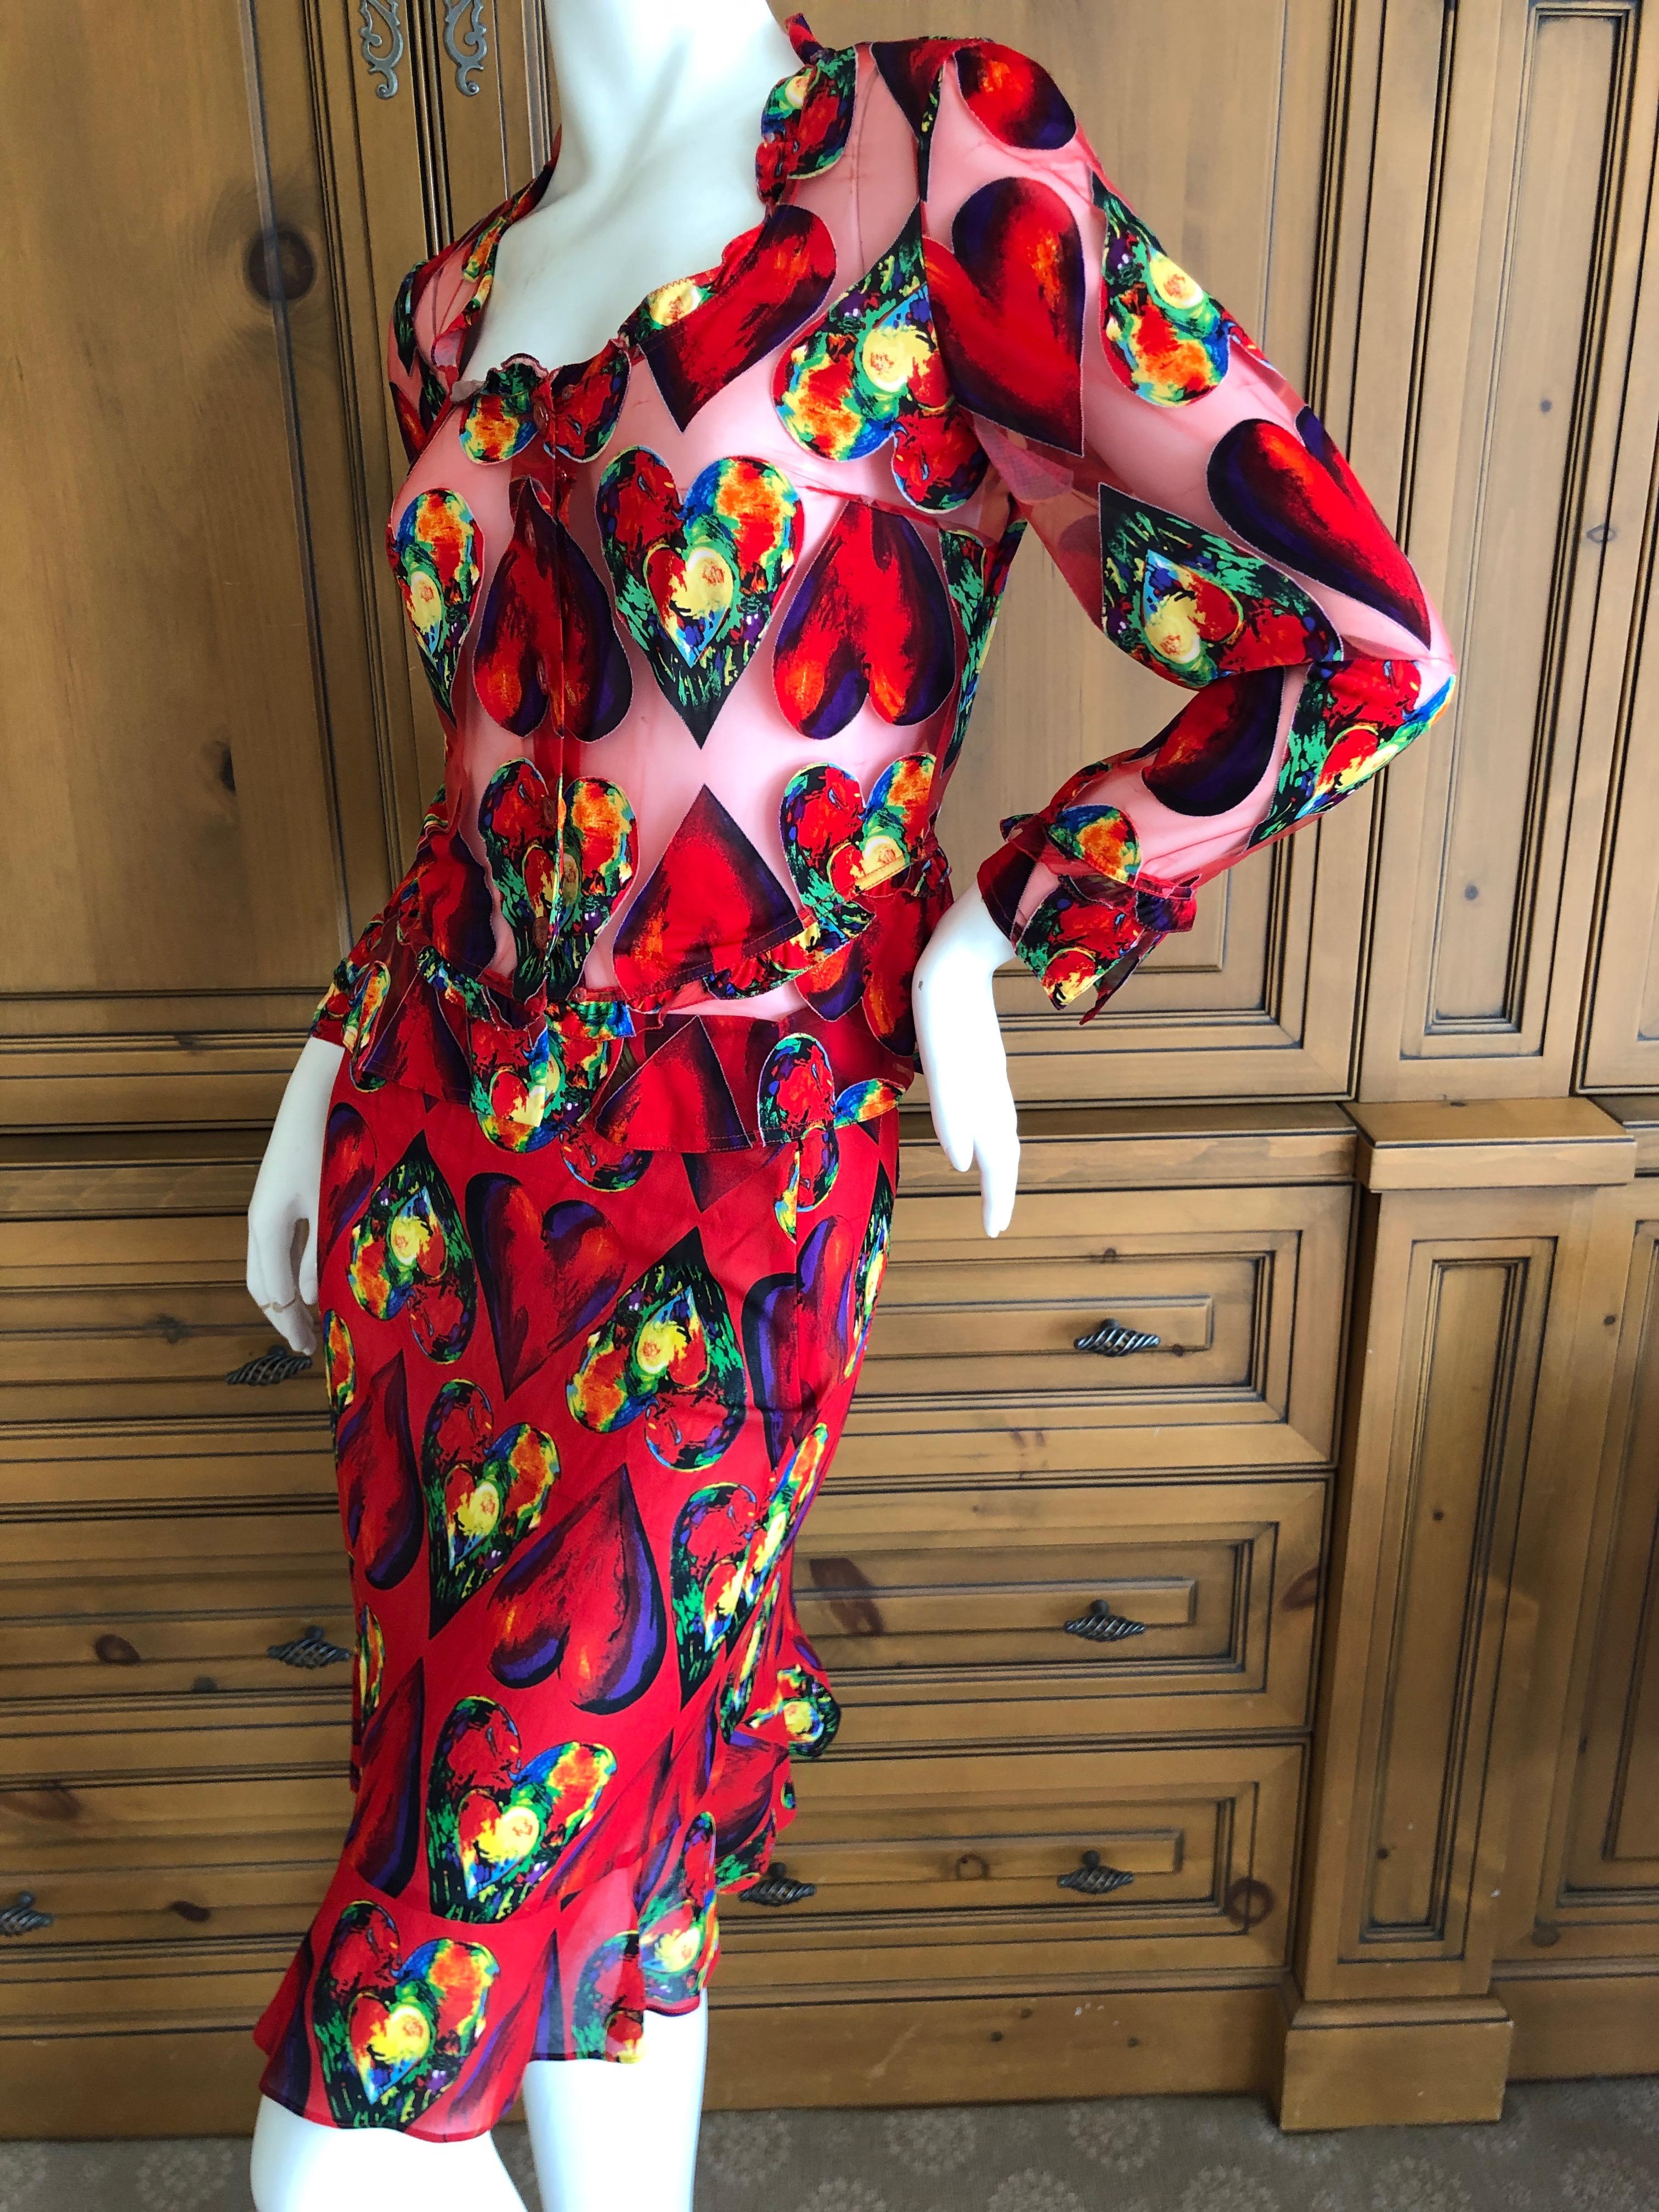 Gianni Versace Couture Spring 1997 Jim Dine Heart Print Sheer Skirt Suit For Sale 4